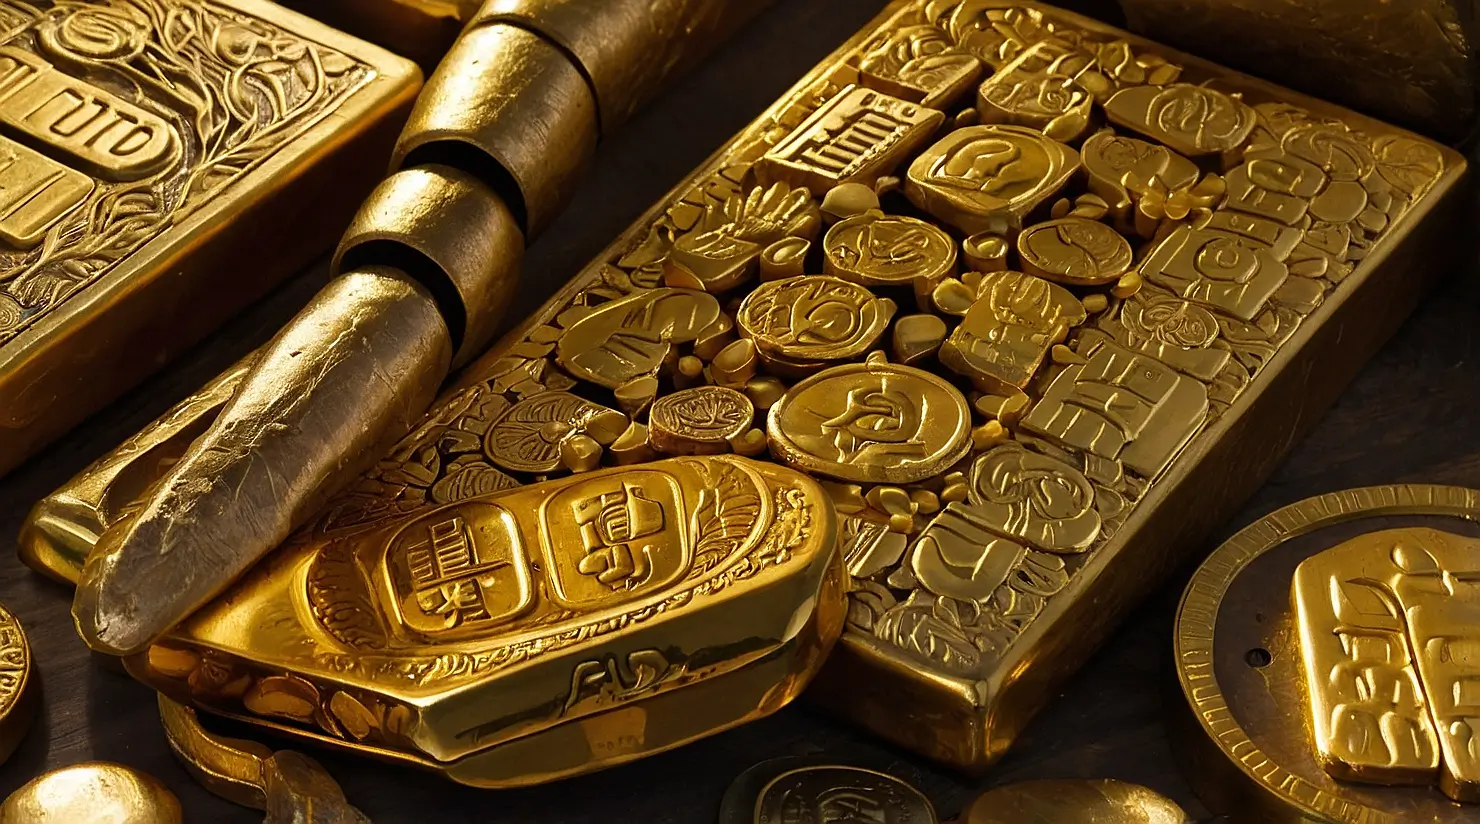 Gold Trade and Economy in Ancient Times